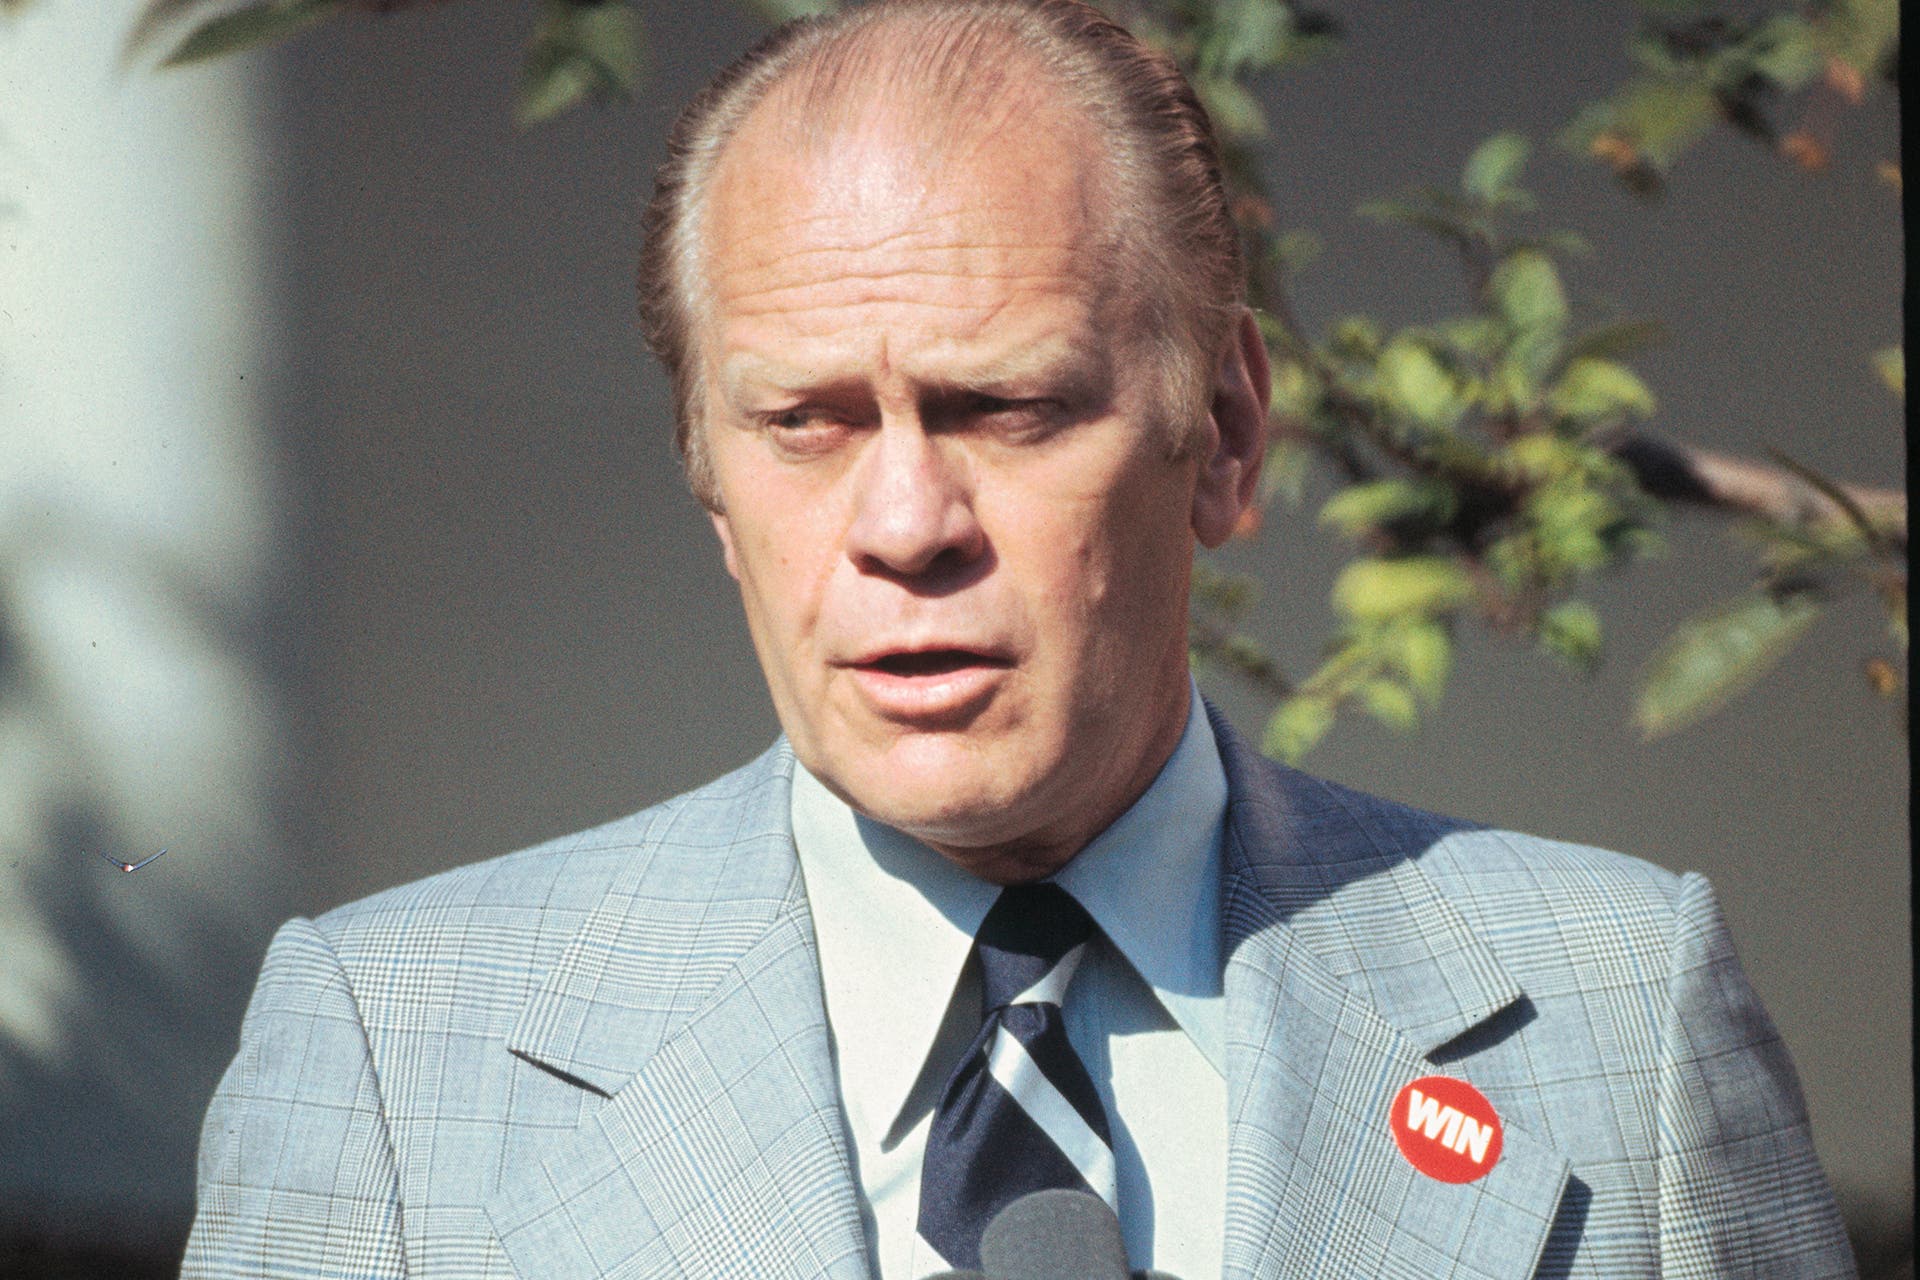 President Gerald Ford wearing a WIN (Whip Inflation Now) button on his lapel during Republican campaigns in North & South Carolina.